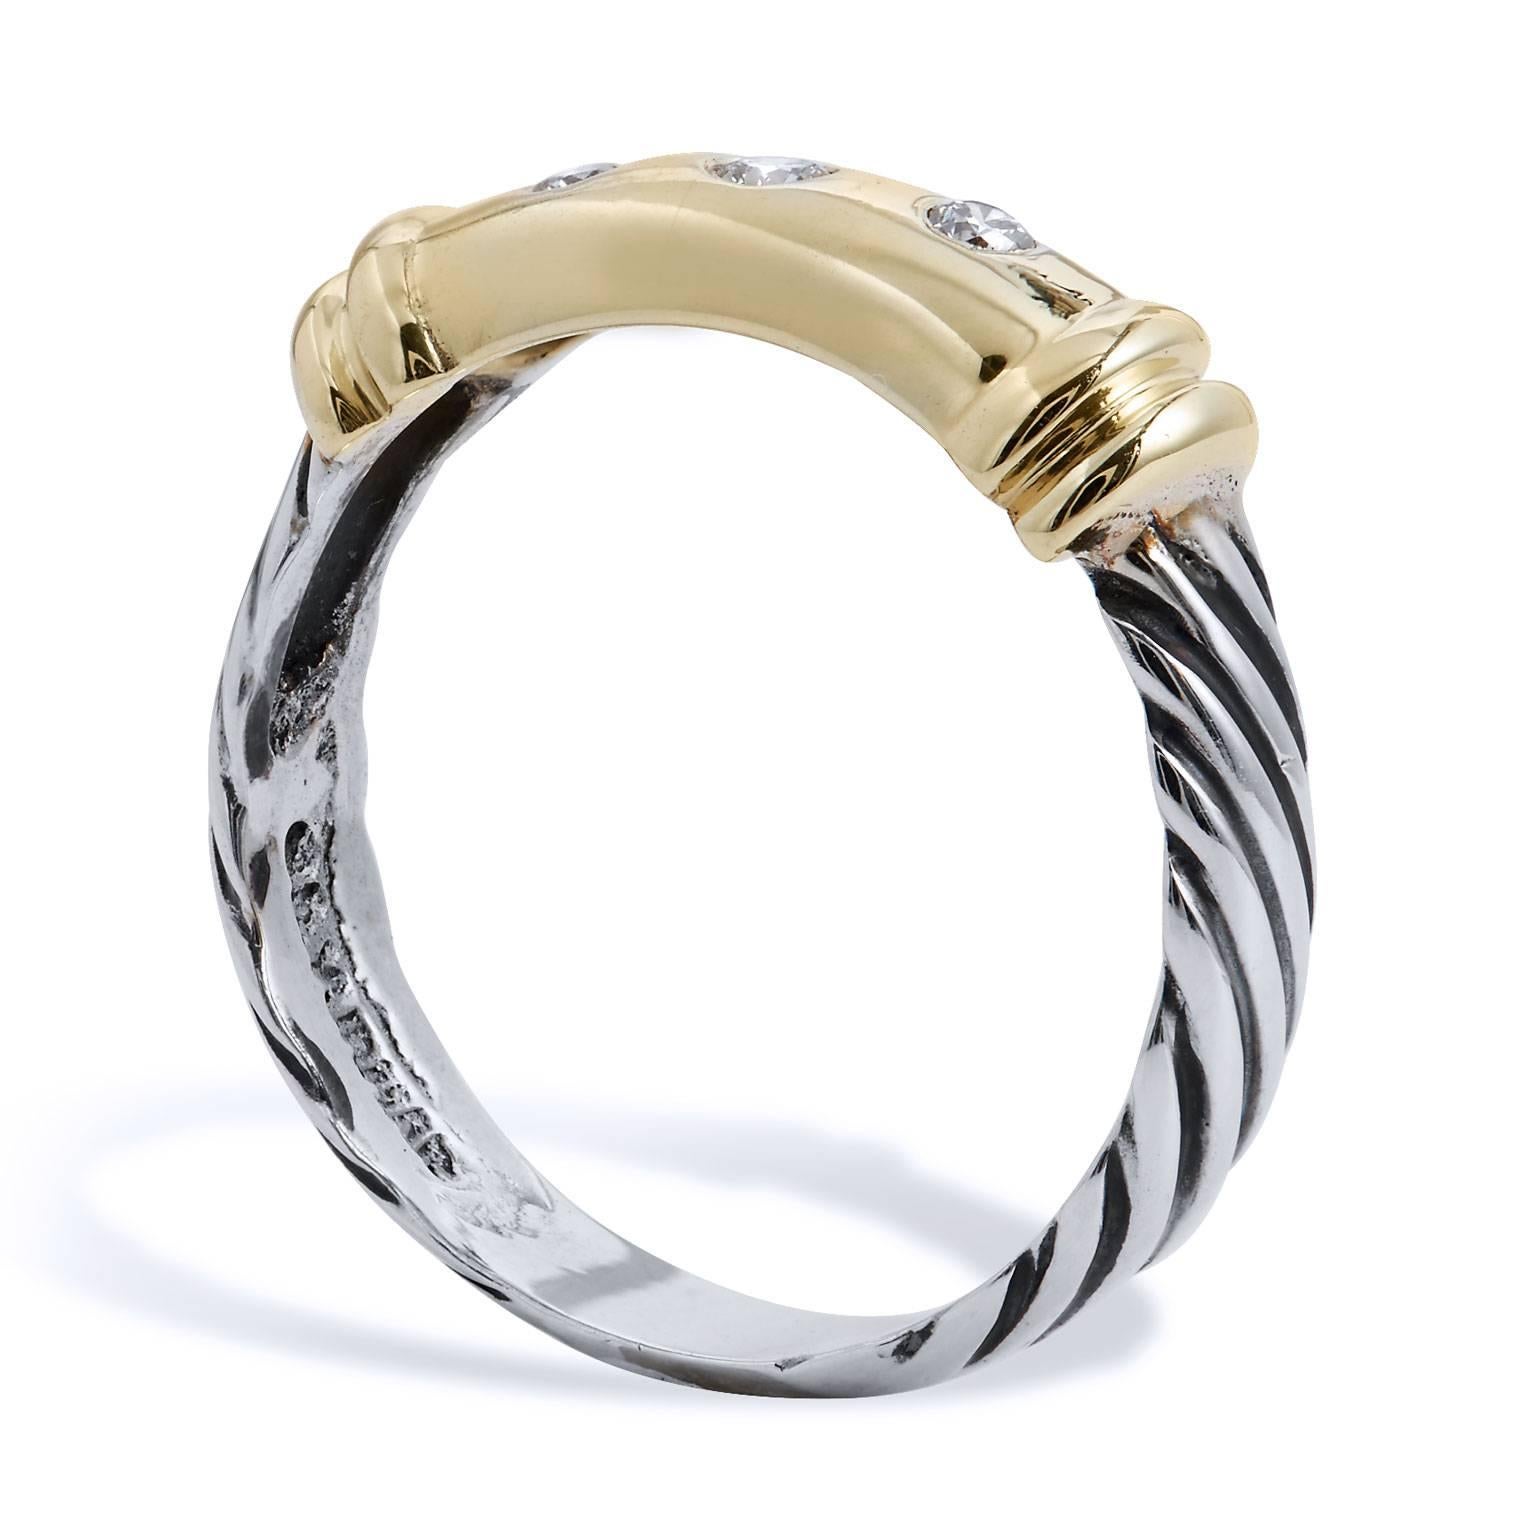 Enjoy this previously loved David Yurman Metro Collection 14 karat yellow gold and silver ring featuring three diamonds in flush setting.